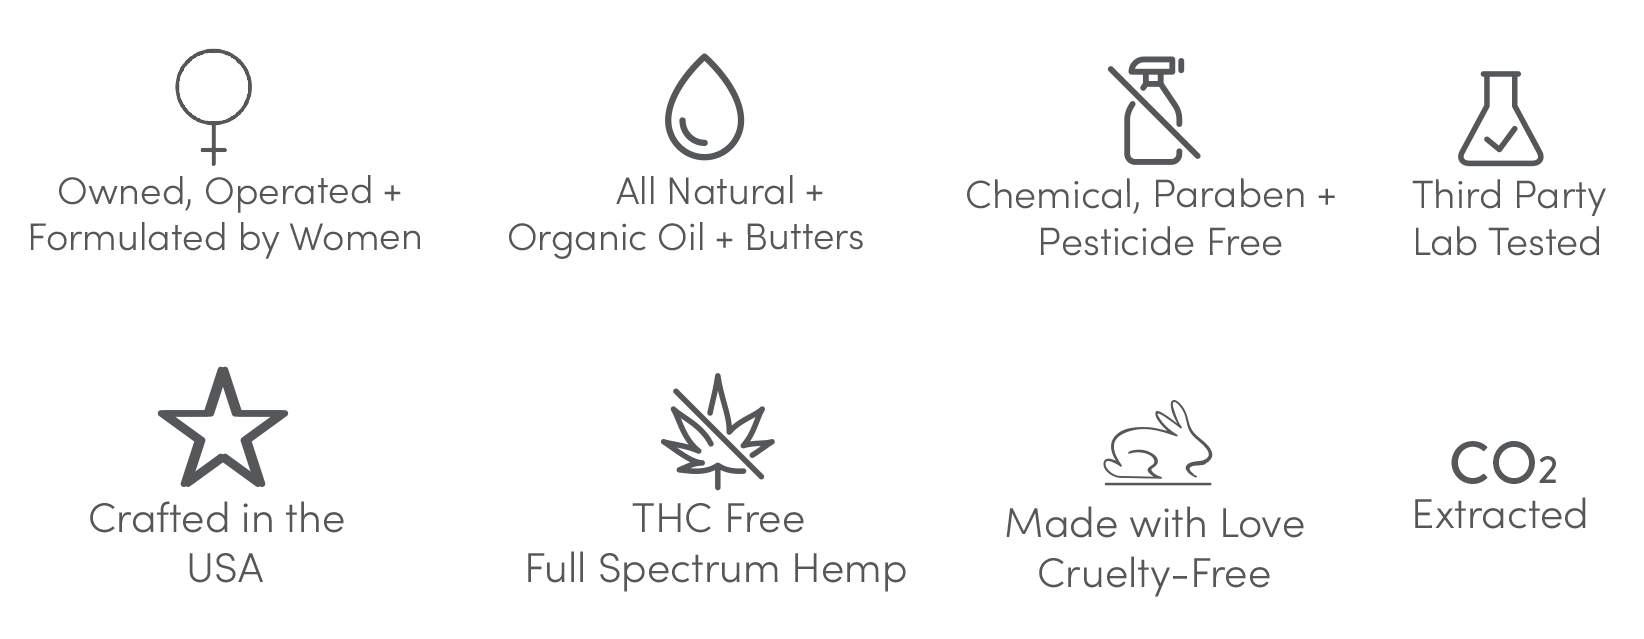 ALL NATURAL HEMP OIL CBD FOR SLEEP AND ANXIETY. WINK-WINK.COM